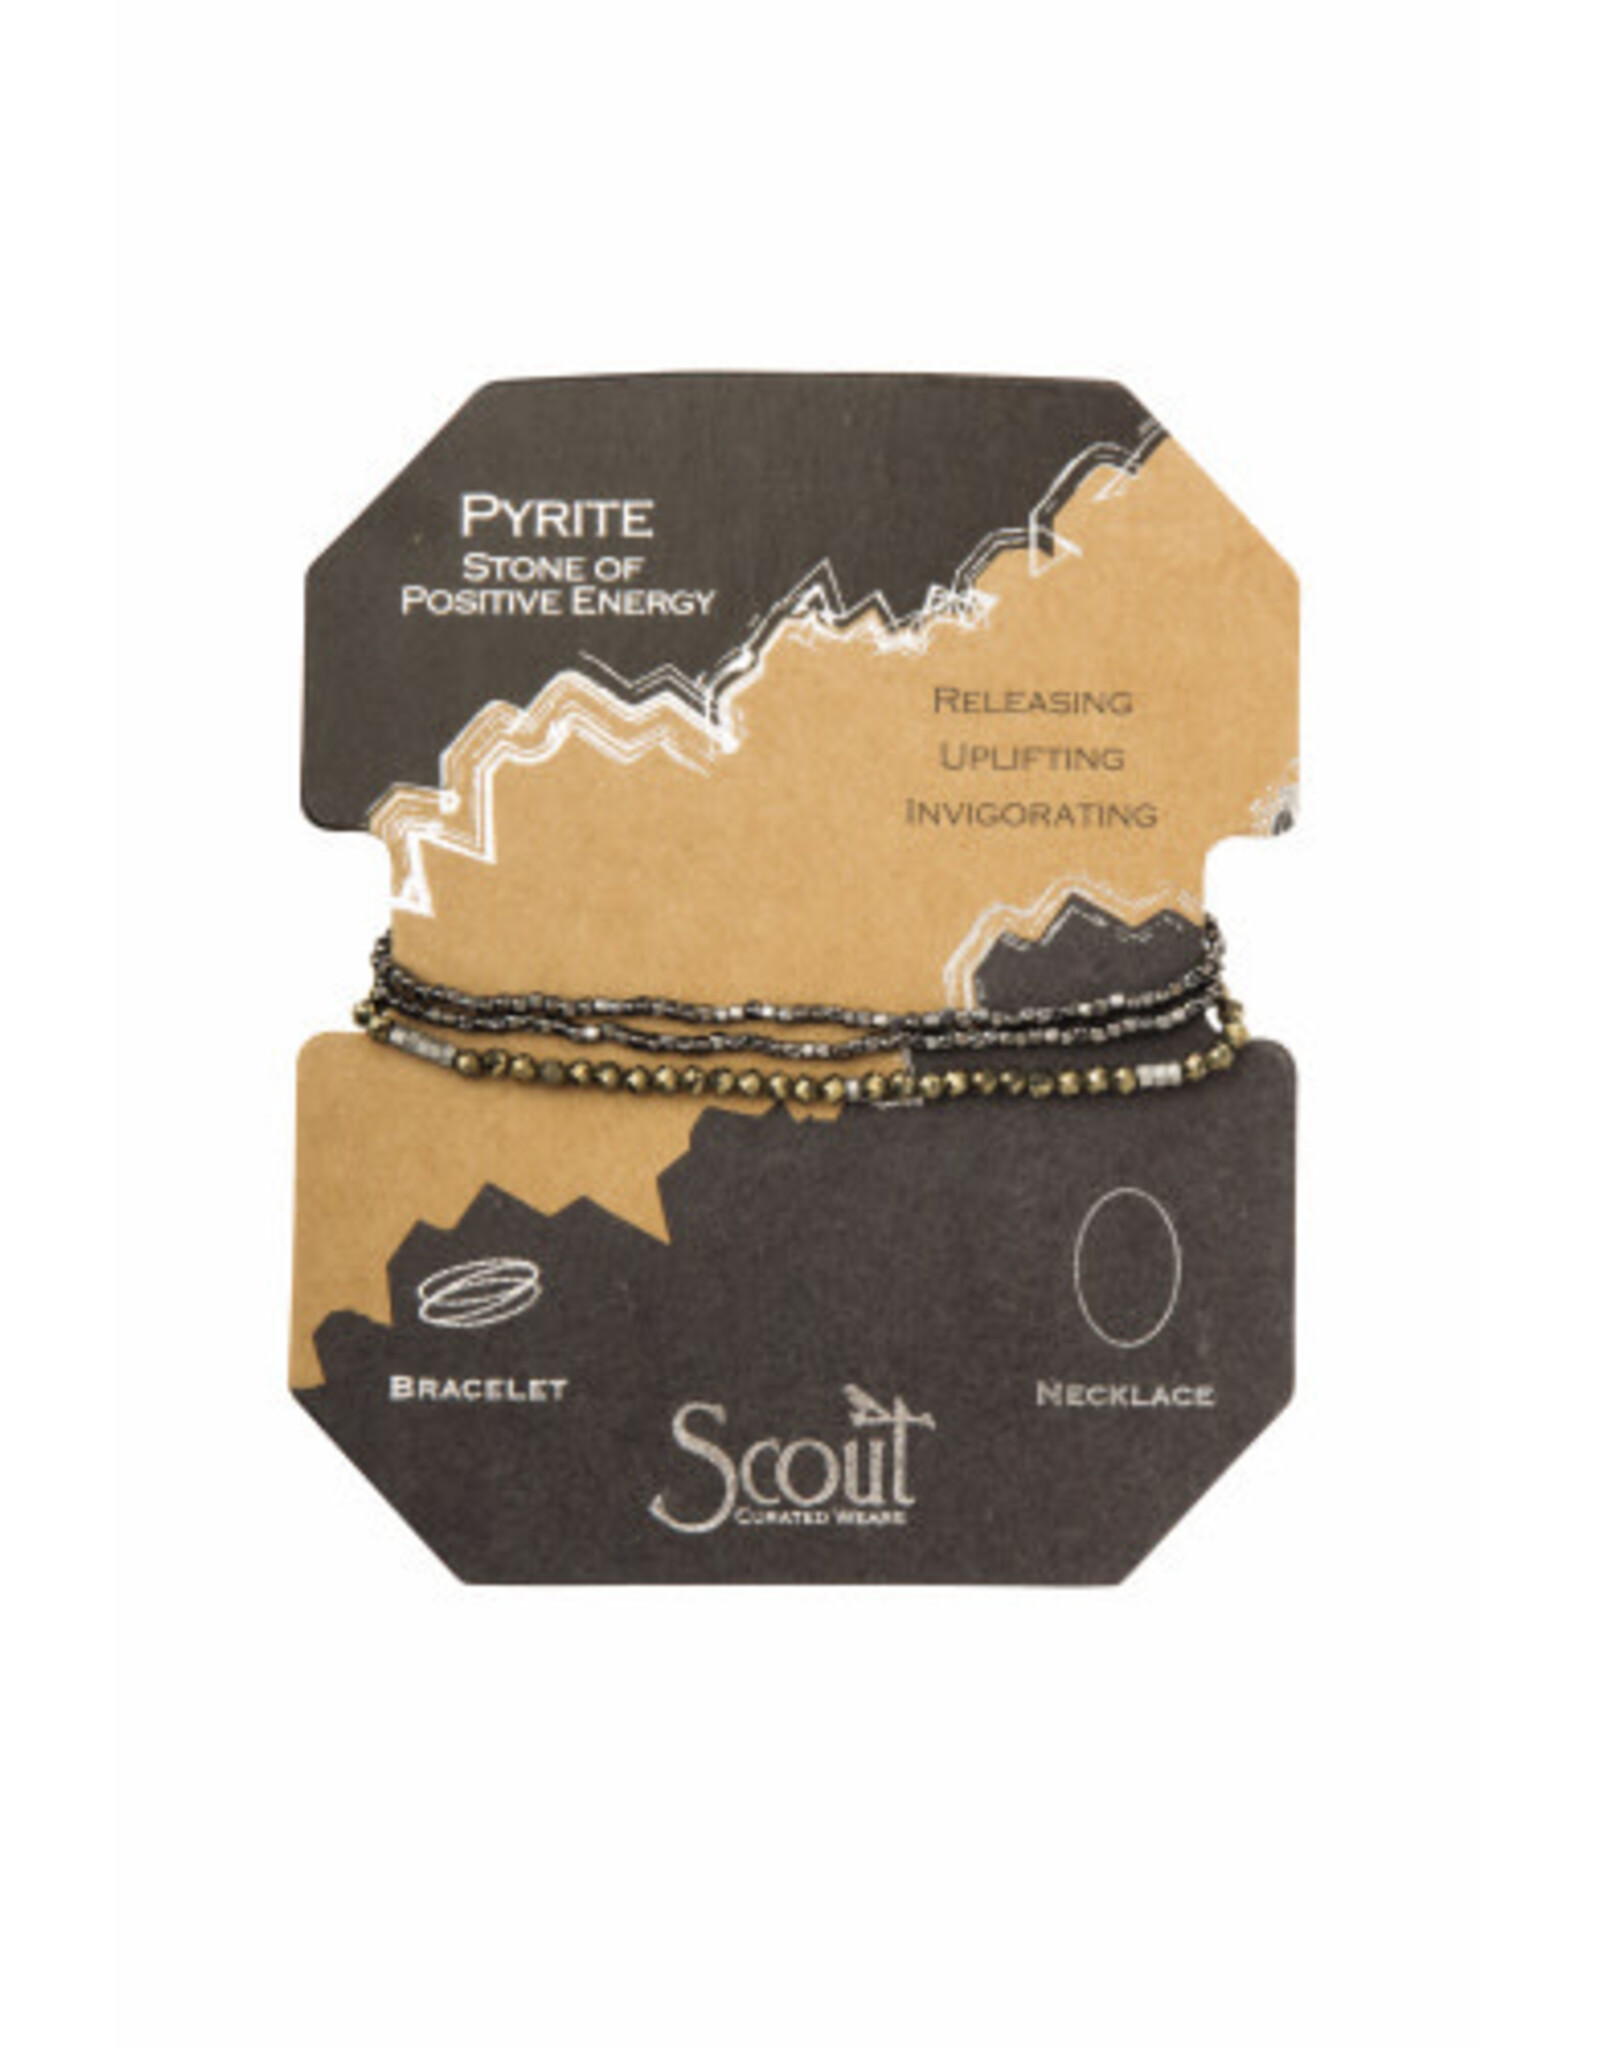 Scout Curated Delicate Stone Neck/Brac Silver